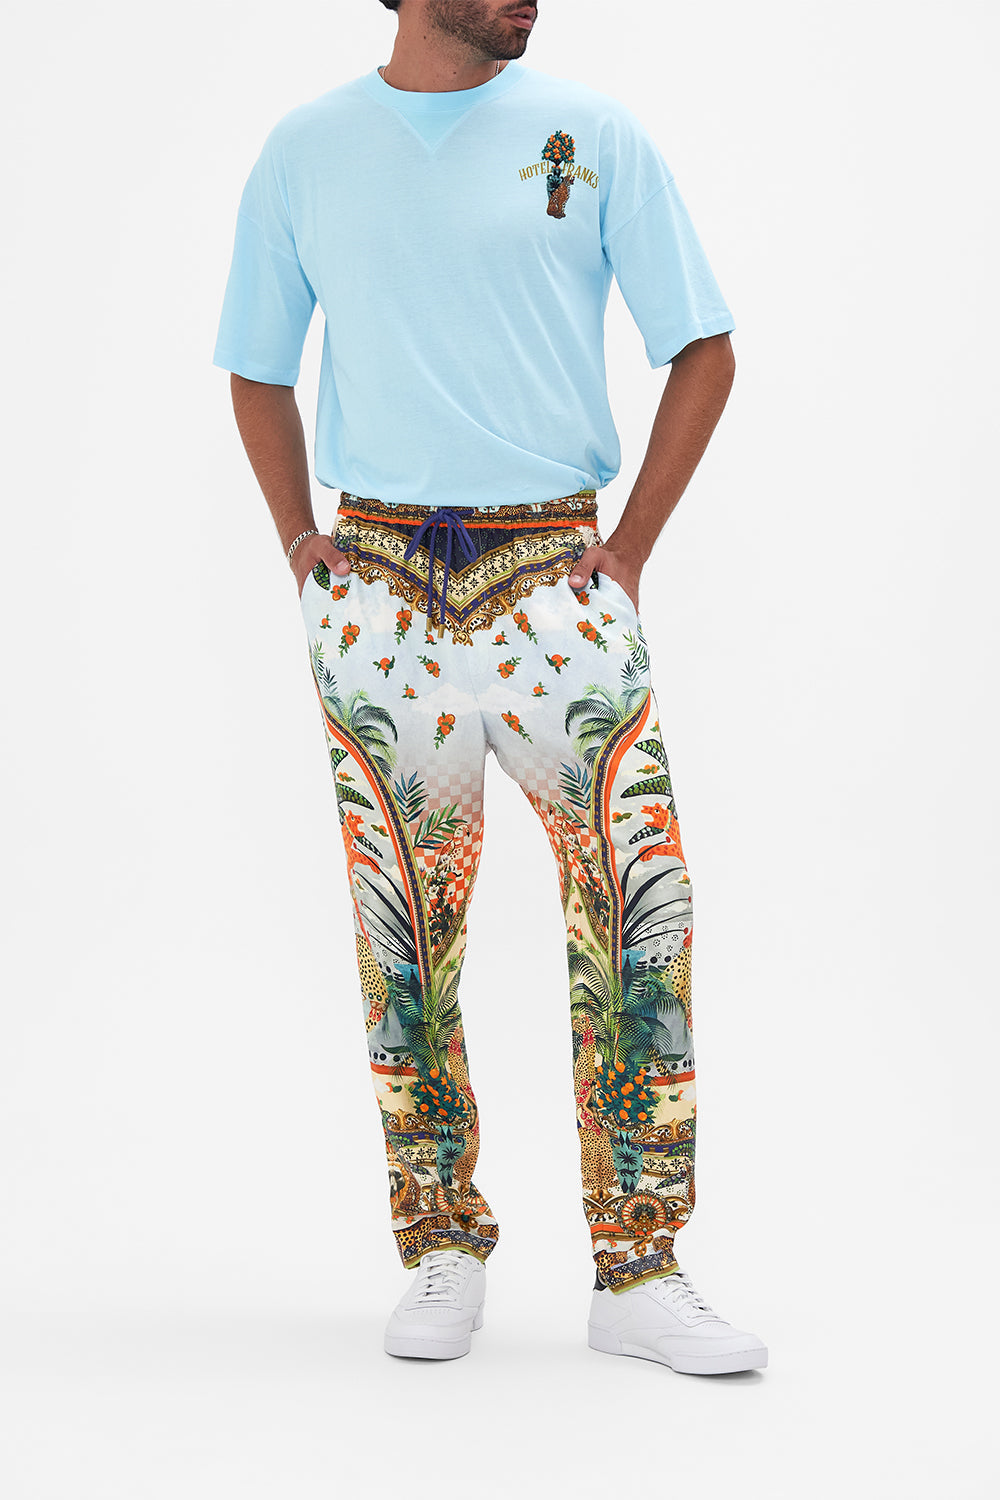 Front view of model wearing HOTEL FRANKS BY CAMILLA mens elasticated pants in Alessandro's Atlantis print